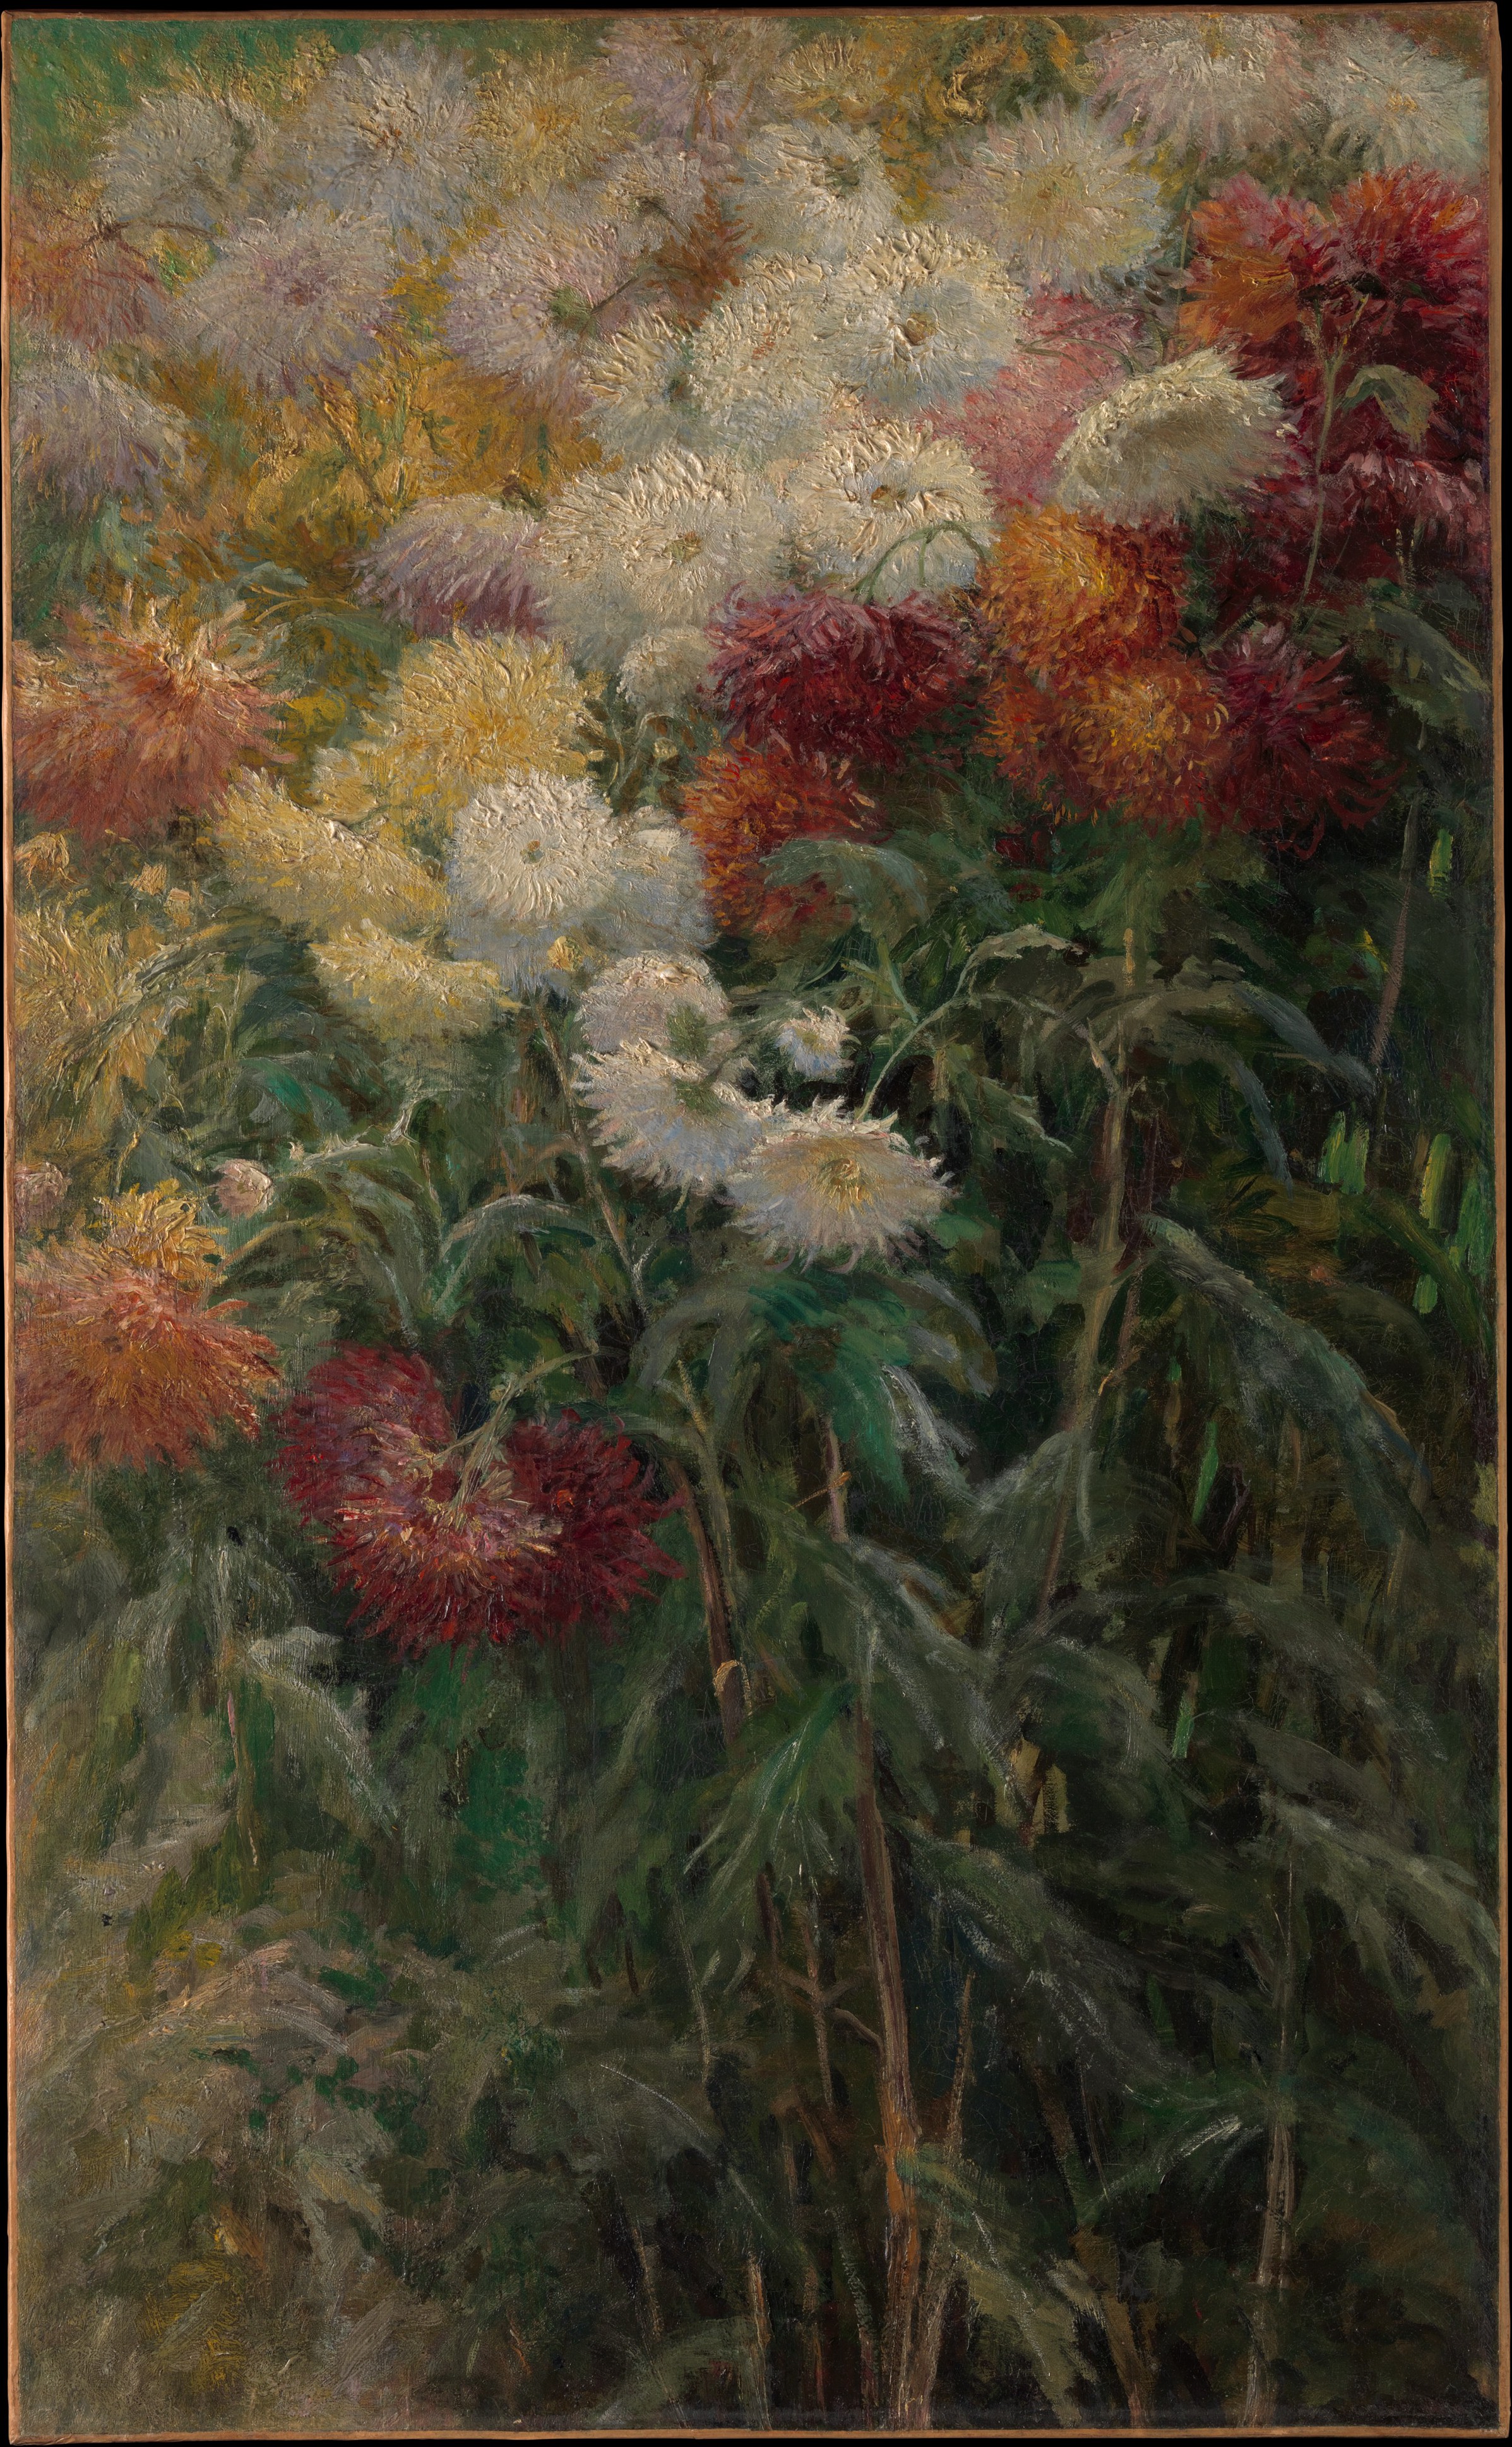 Chrysanthemums in the Garden at Petit-Gennevilliers by Gustave Caillebotte - 1893 - 99.4 × 61.6 cm Metropolitan Museum of Art